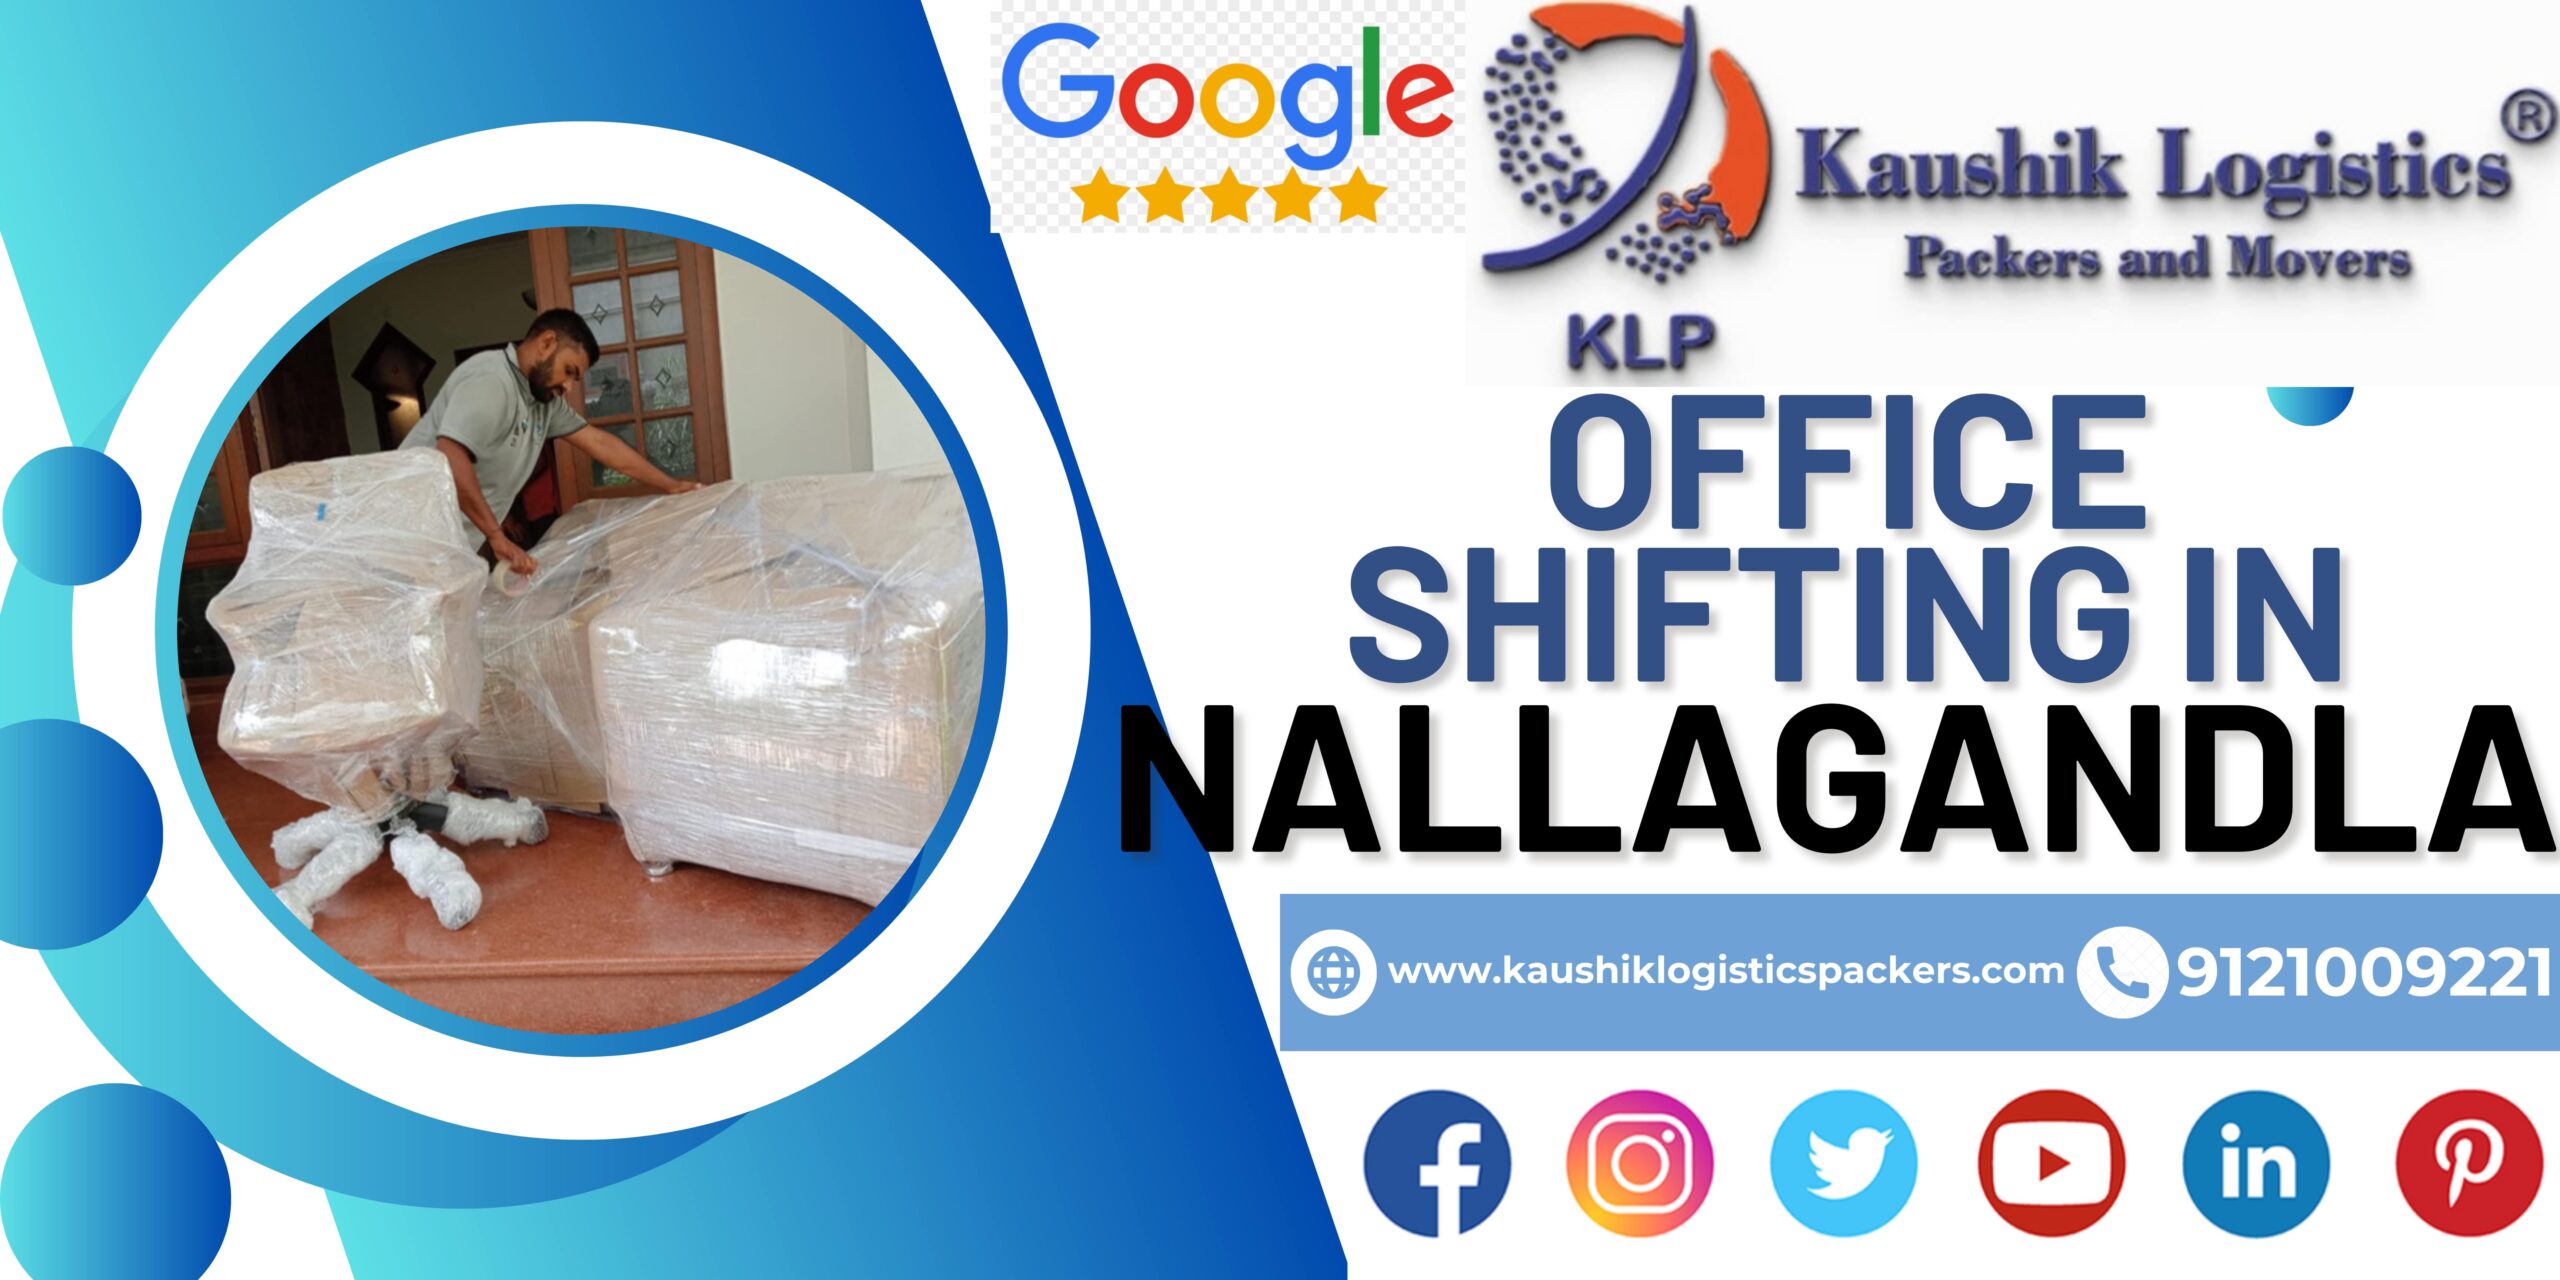 Packers and Movers In Nallagandla